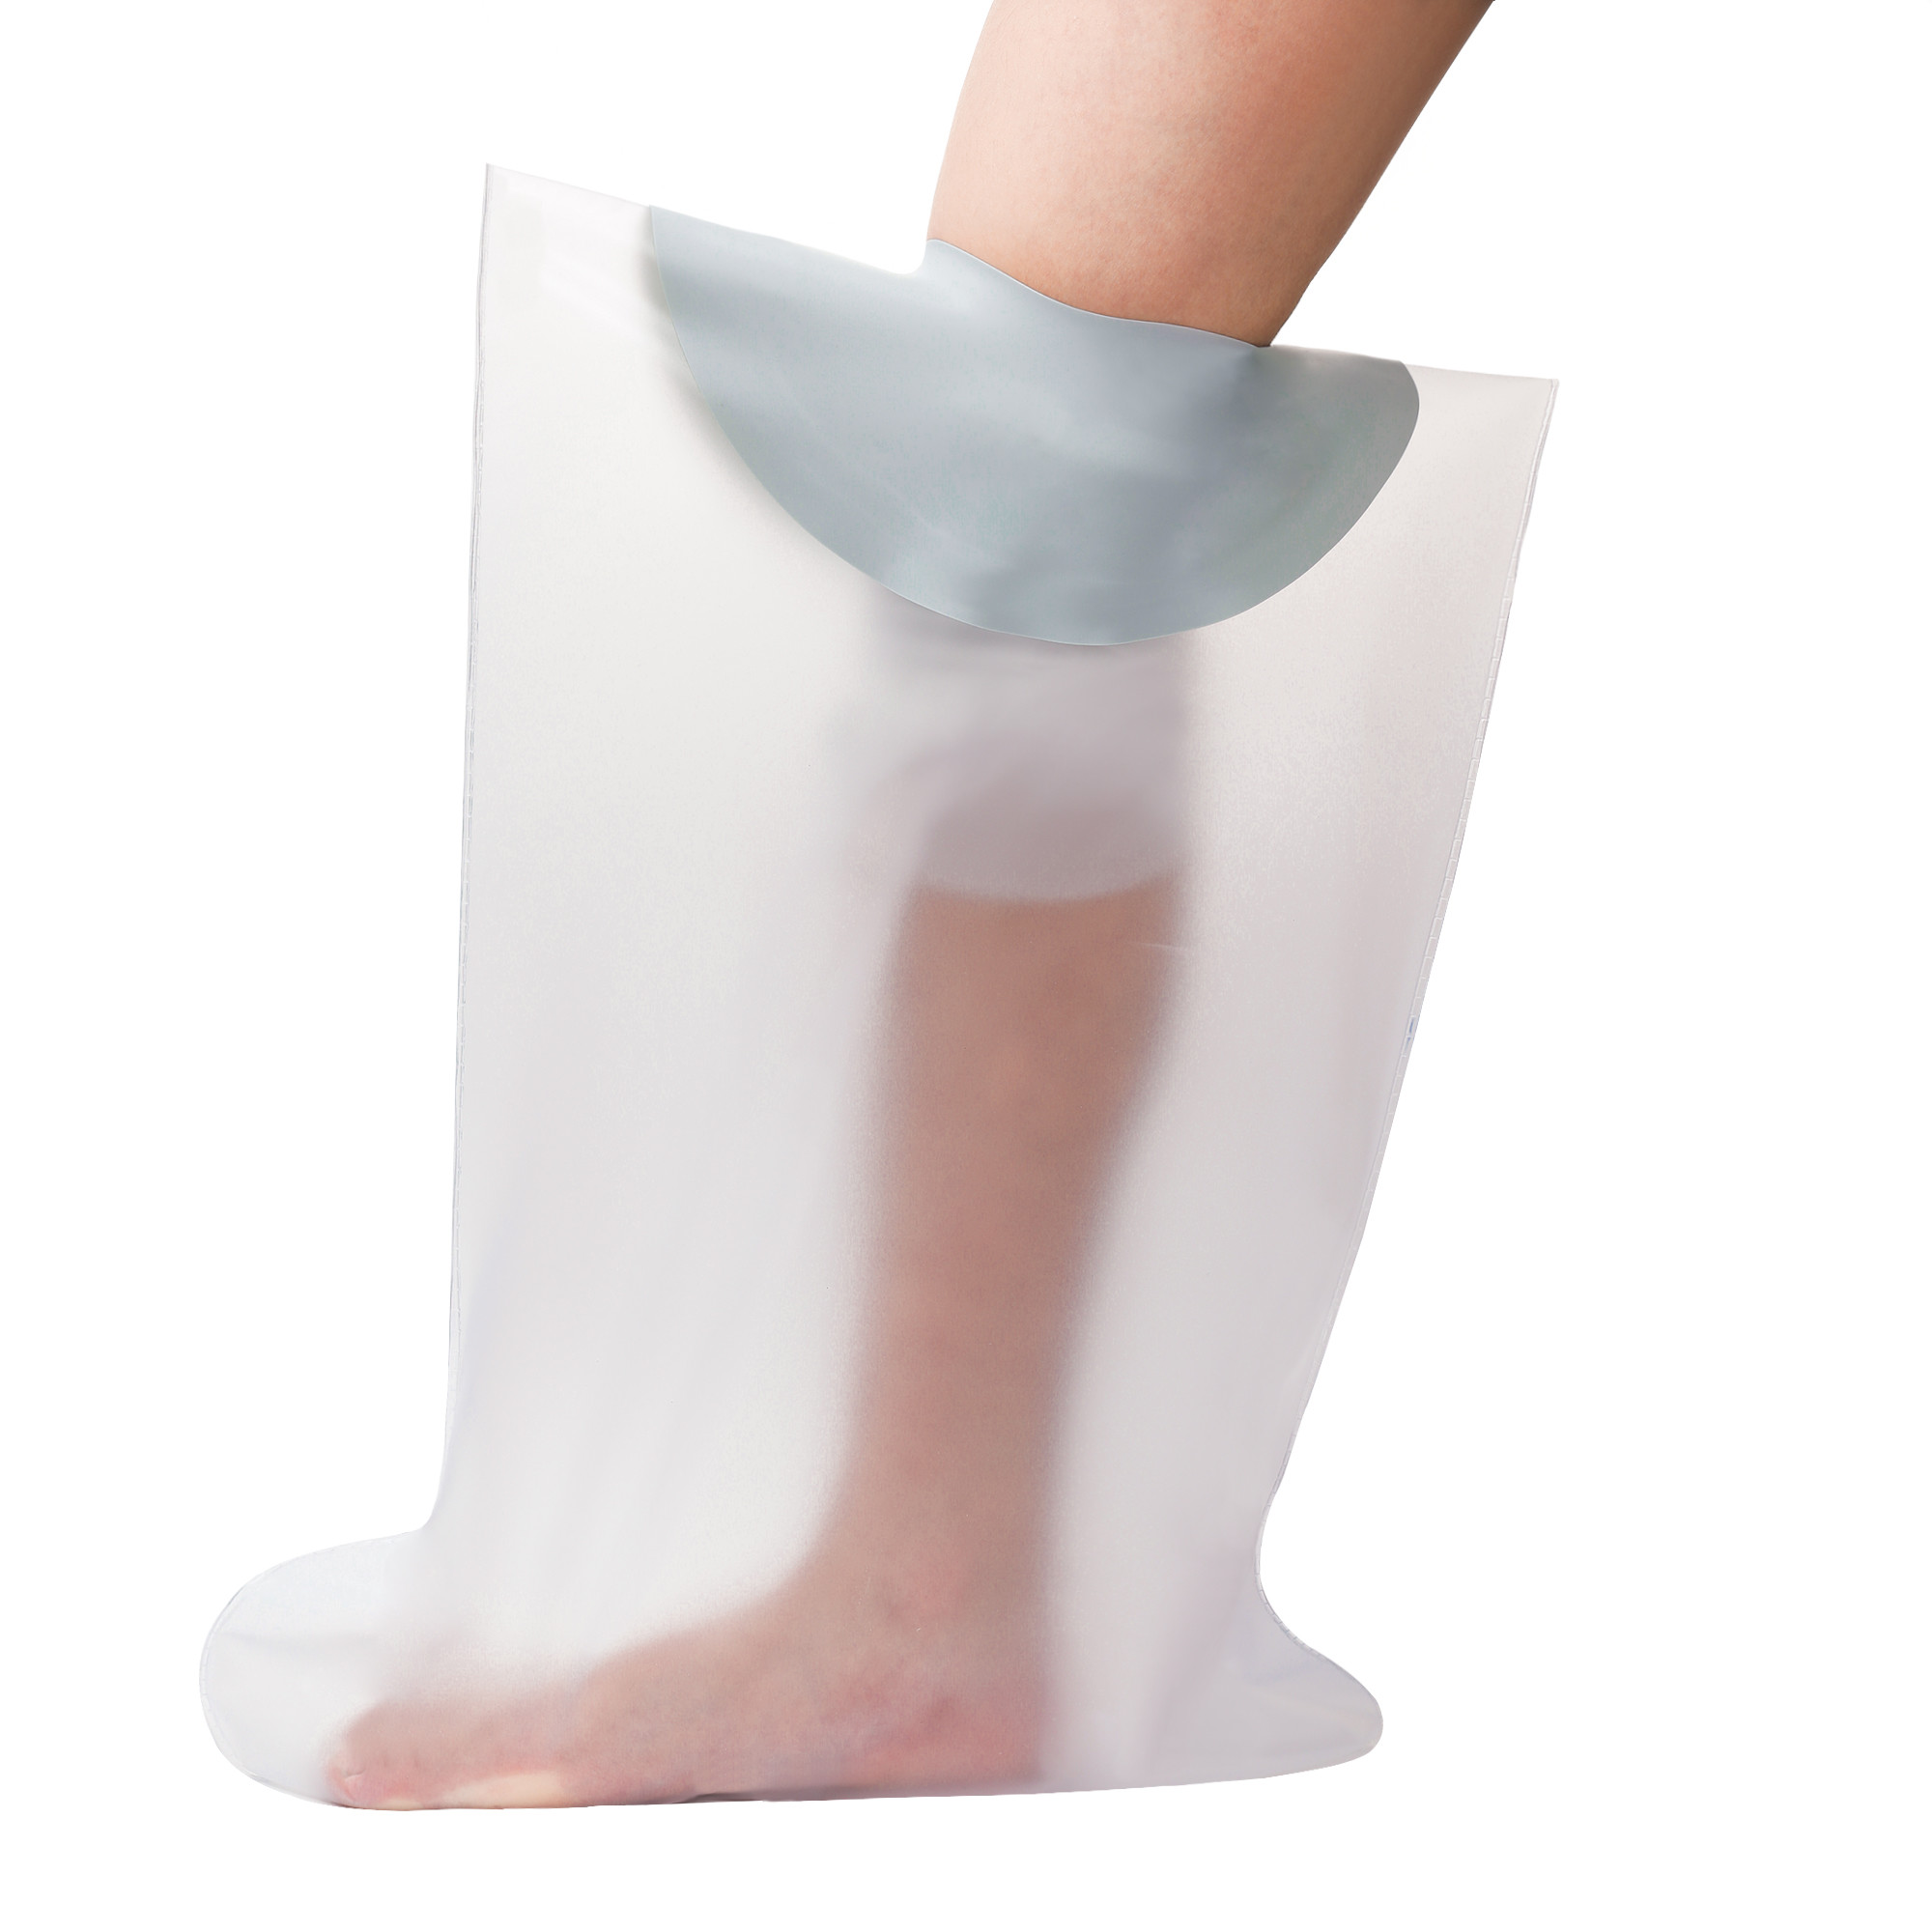 Buy Childs Waterproof Cast Protector For Leg Dressing Shower Sleeve For Broken Arm at wholesale prices